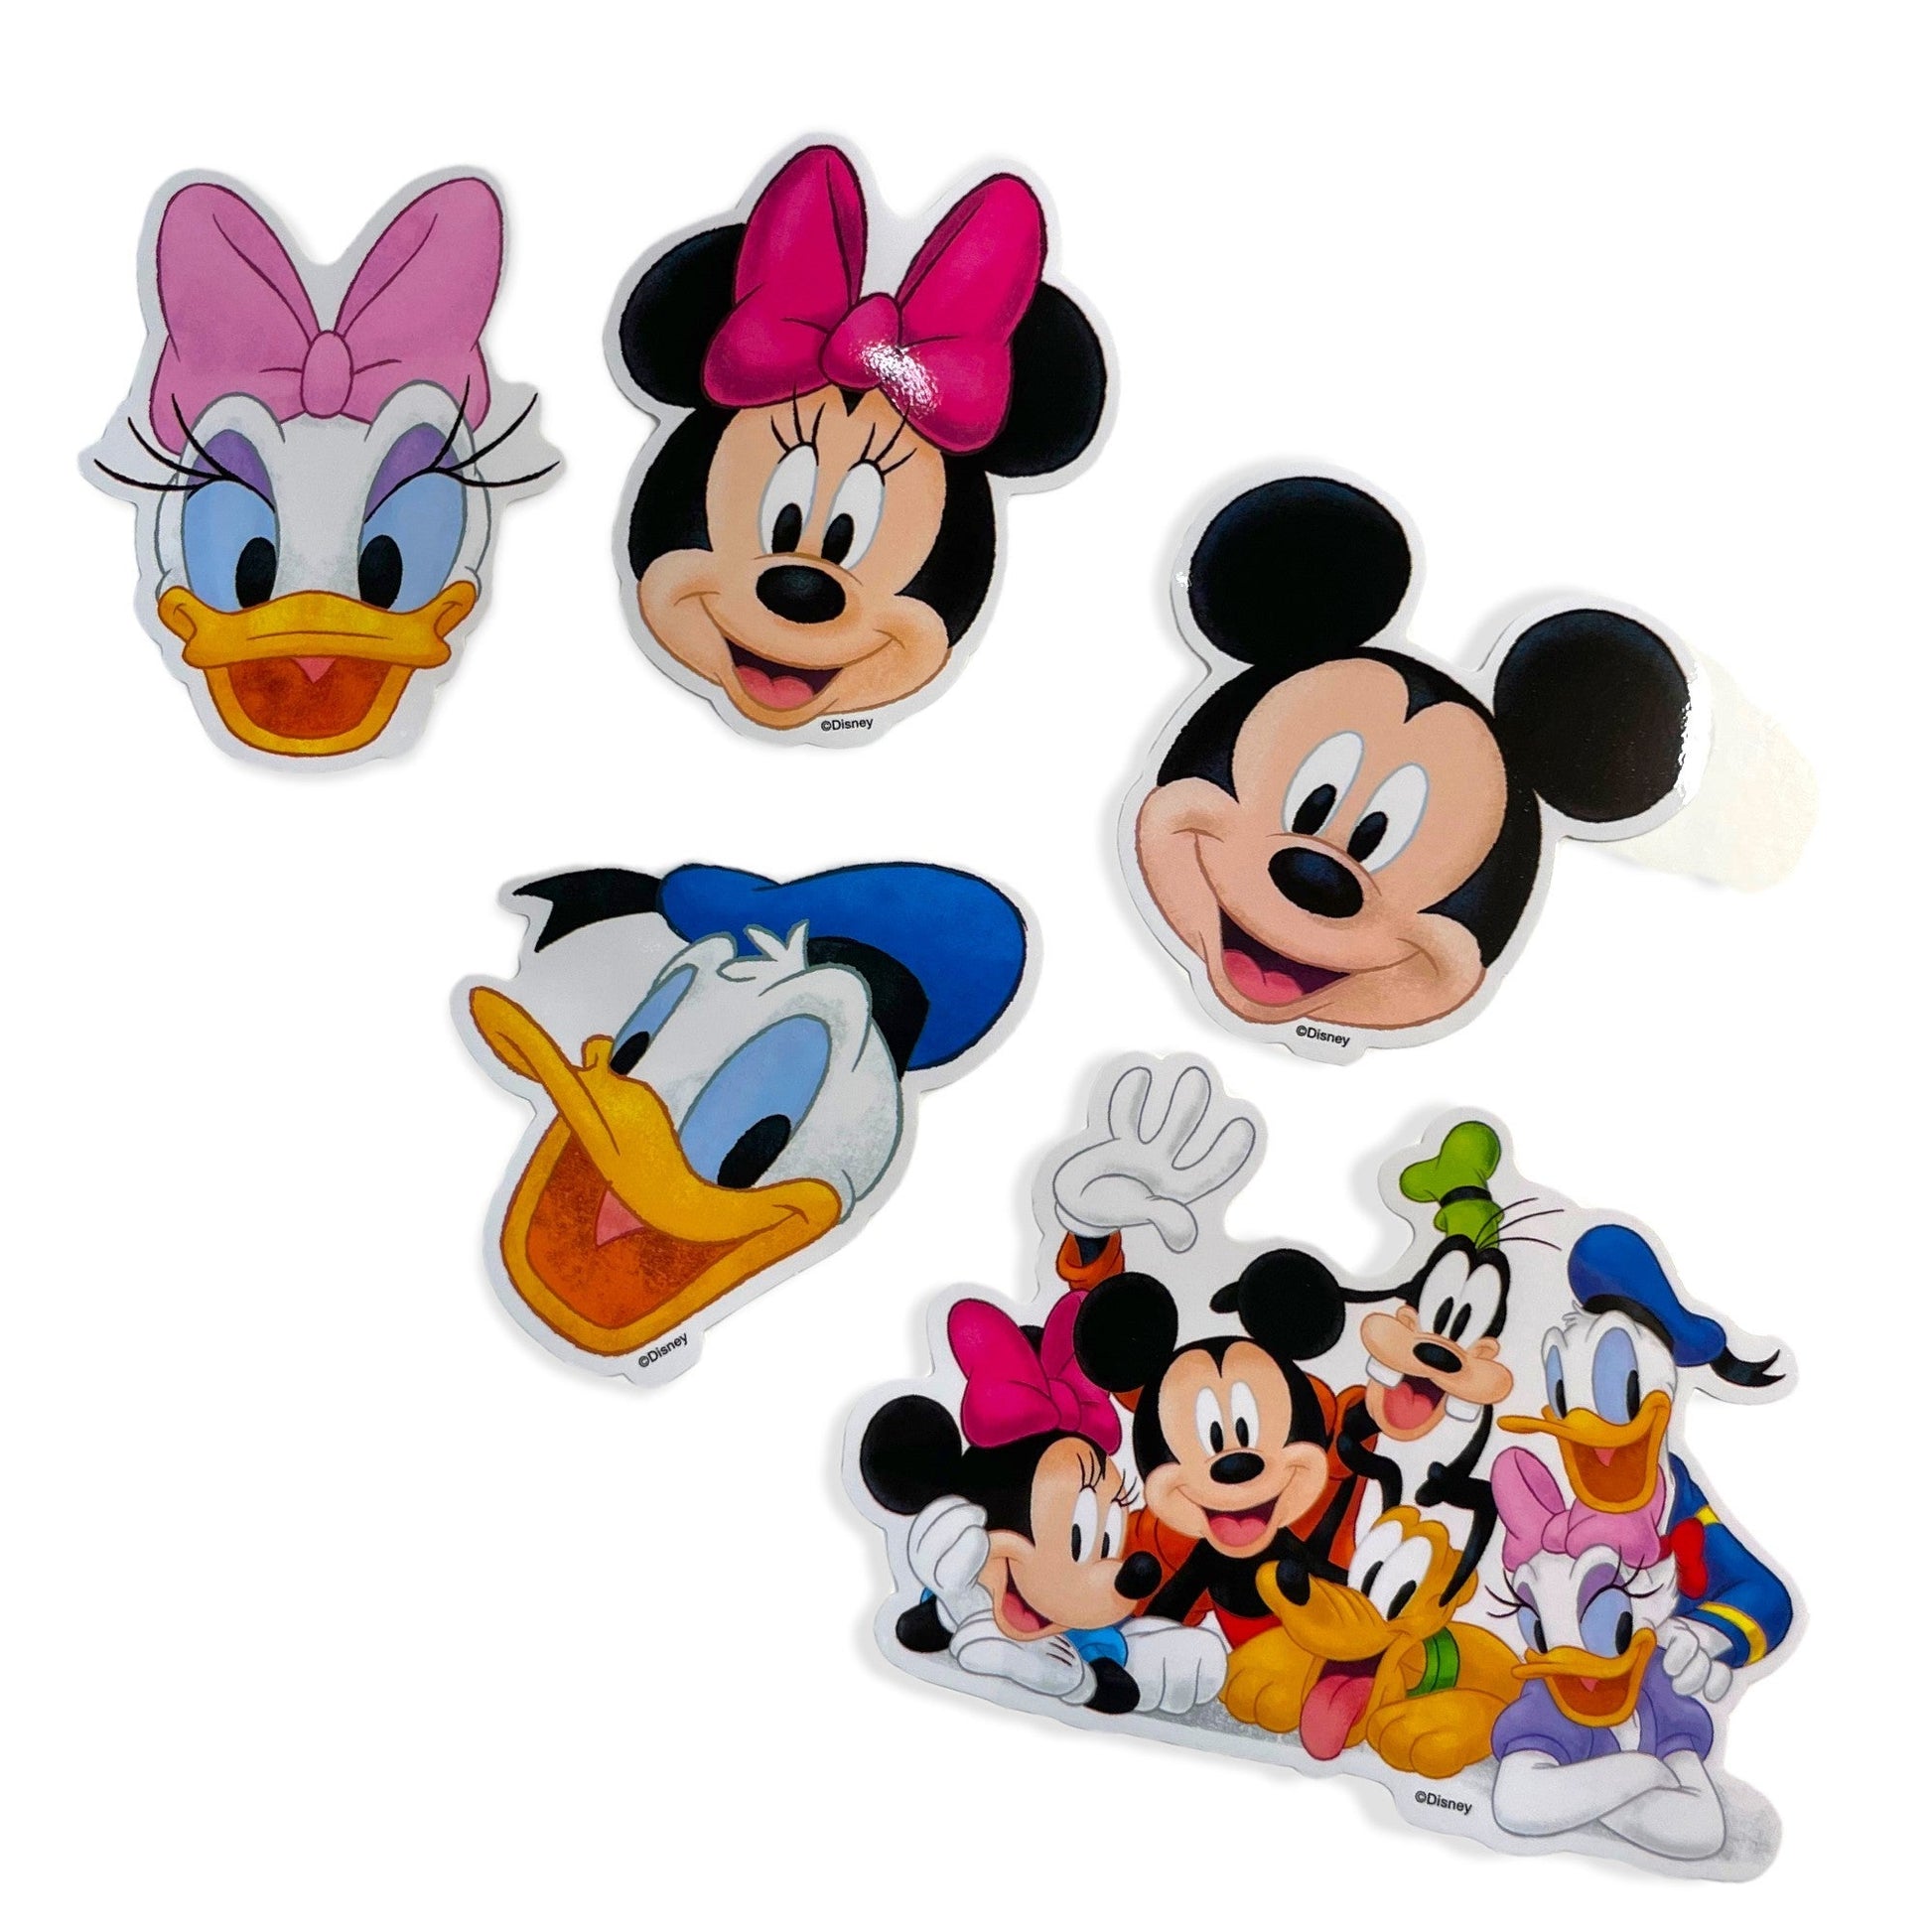 Disney Stickers - Disney Mickey and Minnie Mouse Lot of 5 Stickers.